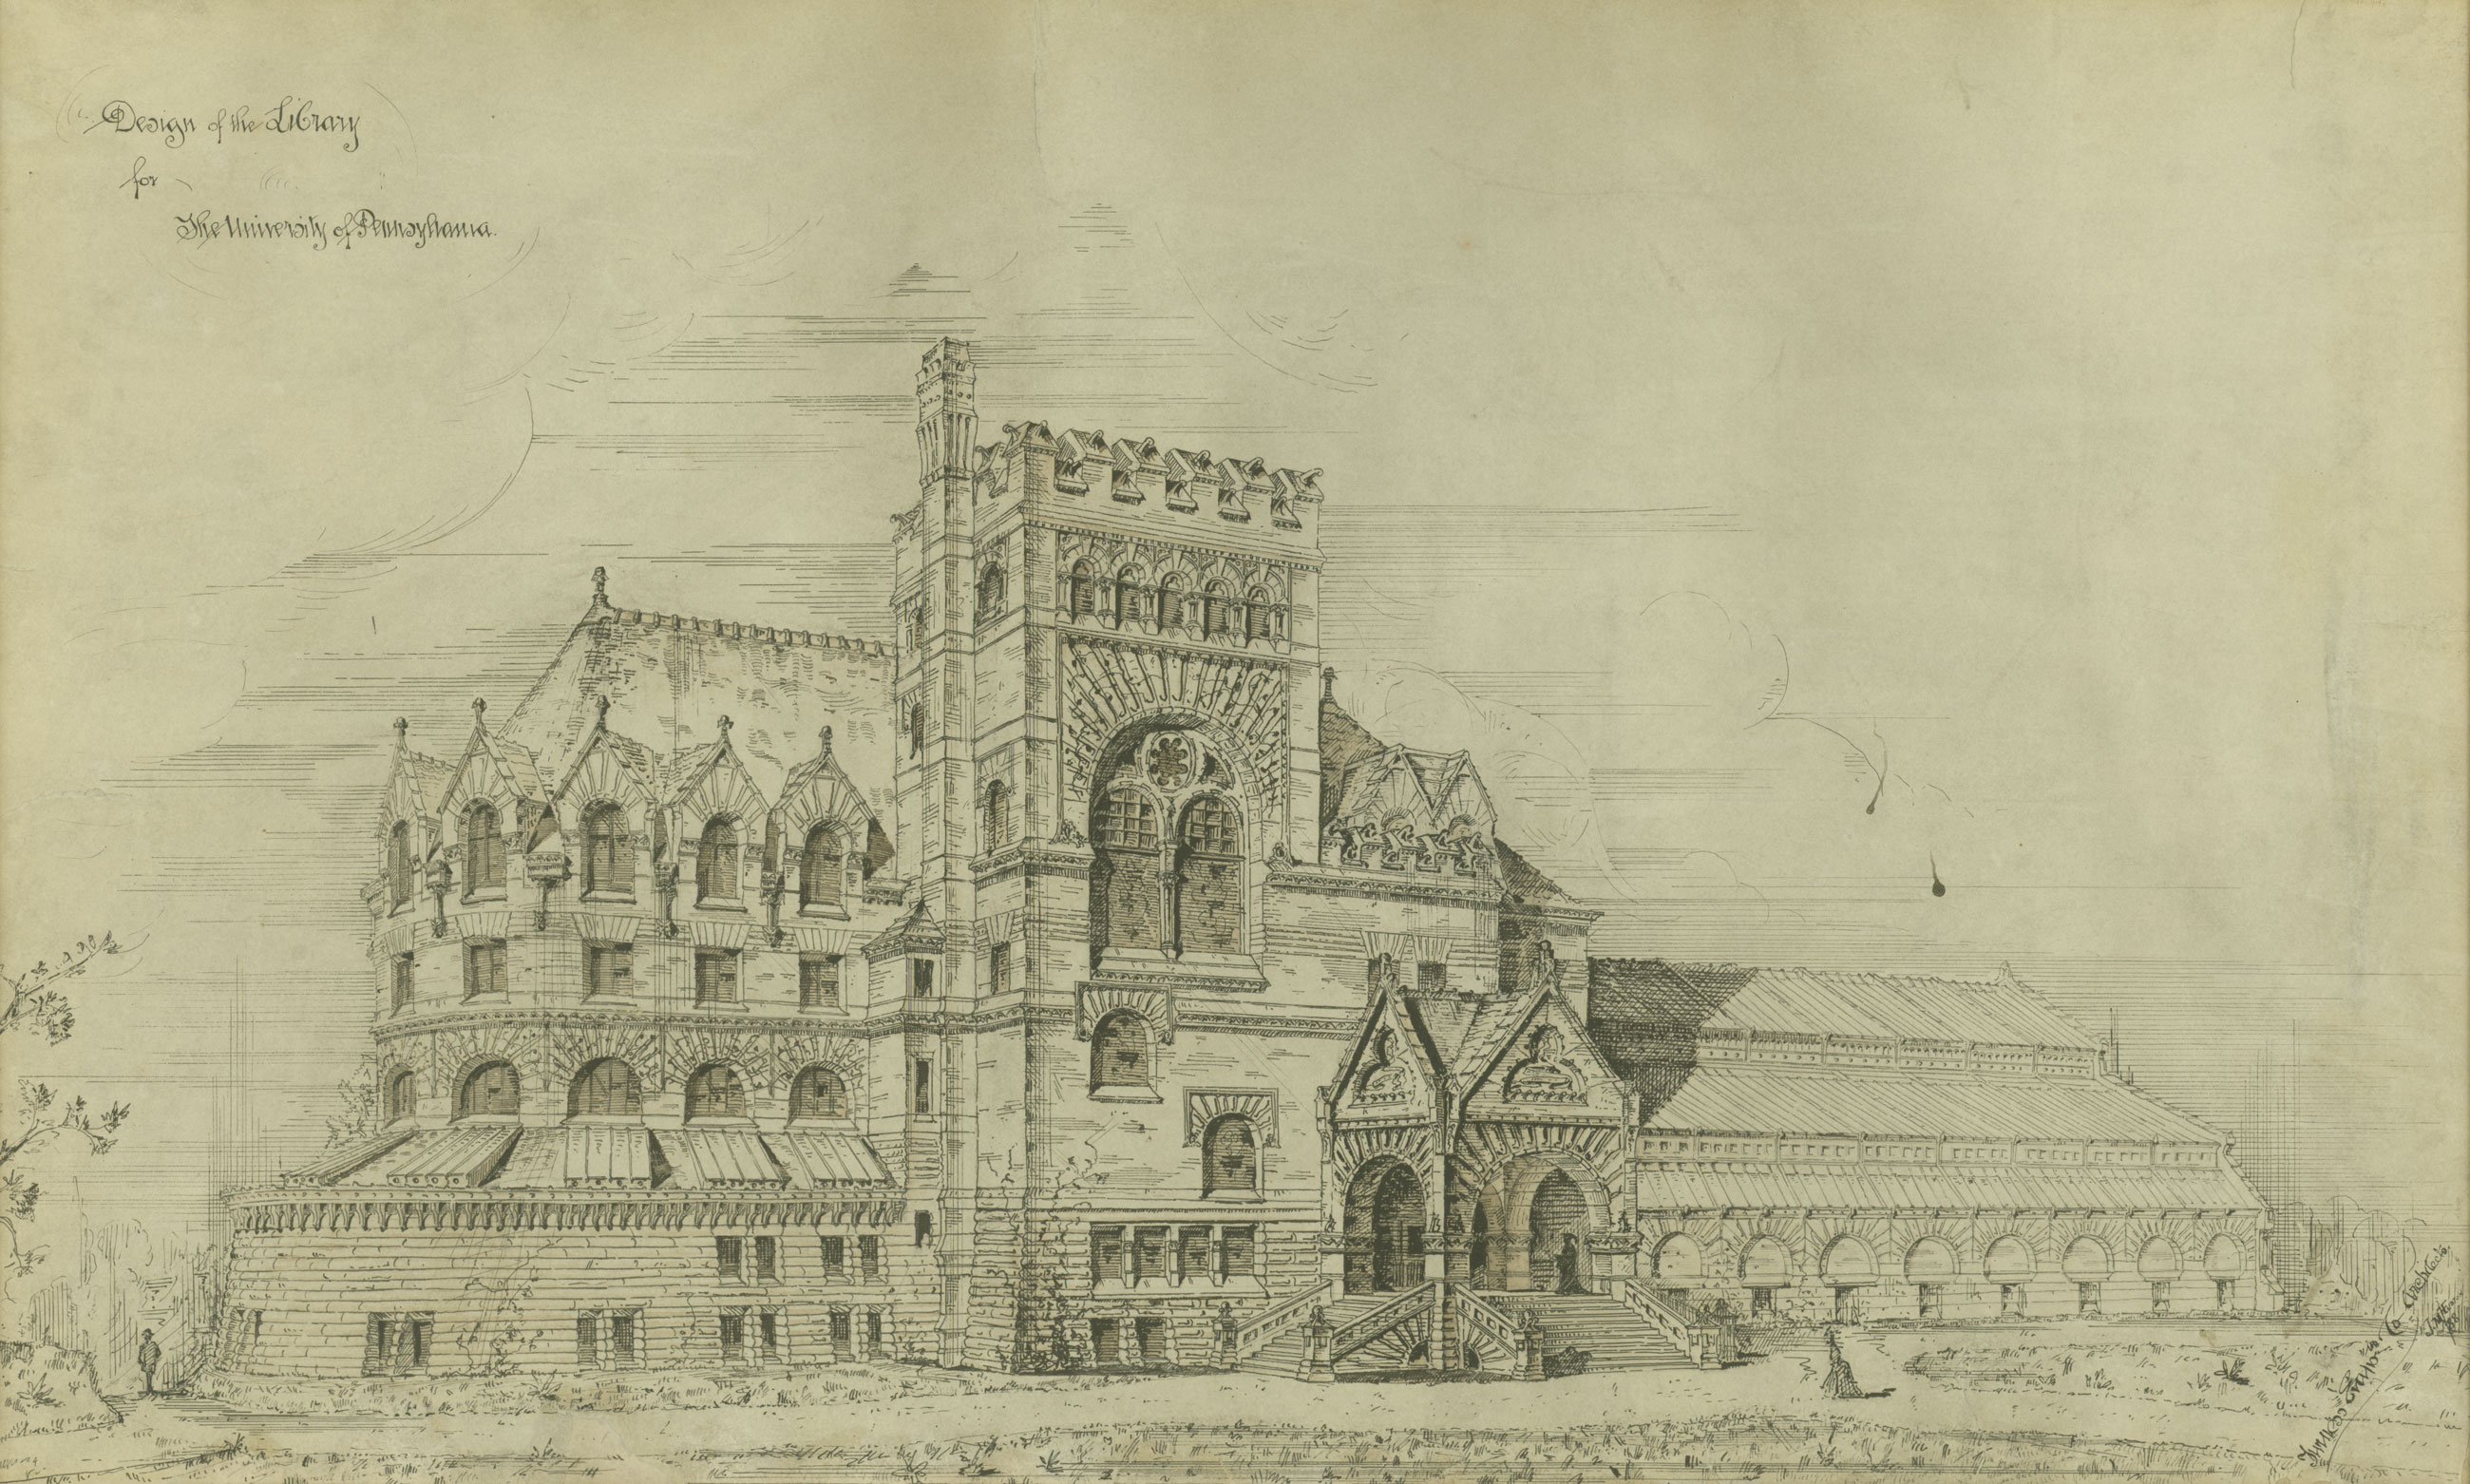 Sketch of the Fisher Fine Arts library building